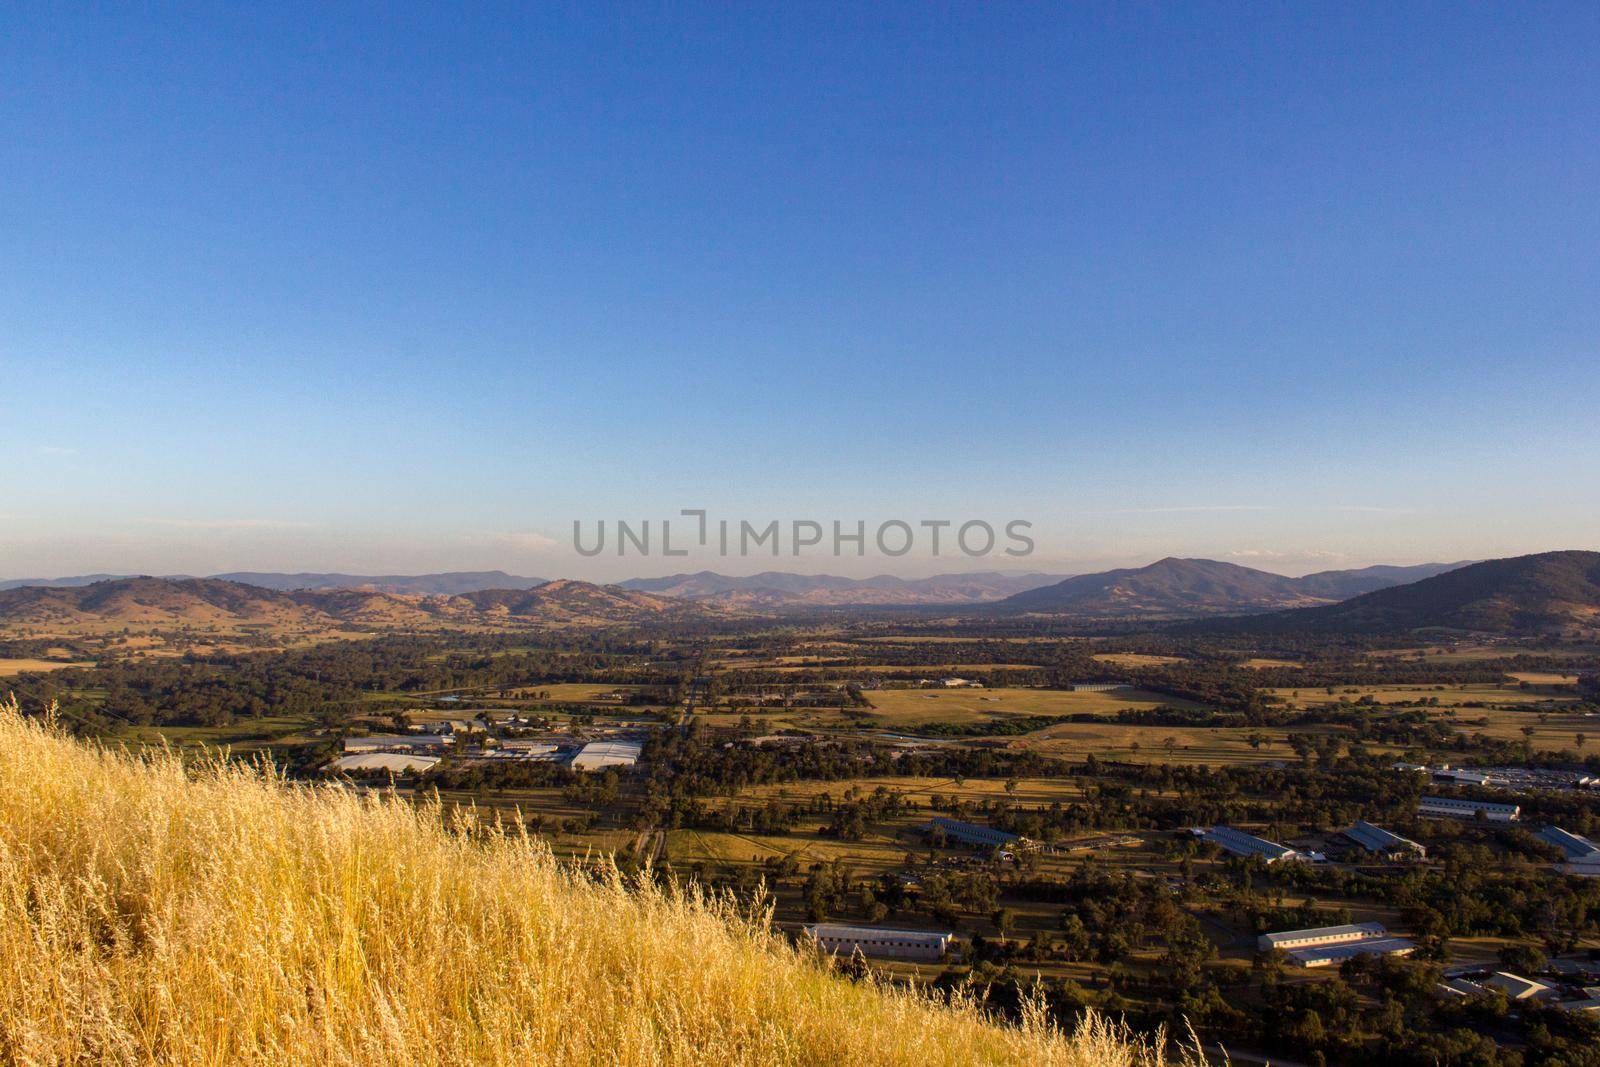 view over Albury Landscape - located in NSW Australia by bettercallcurry